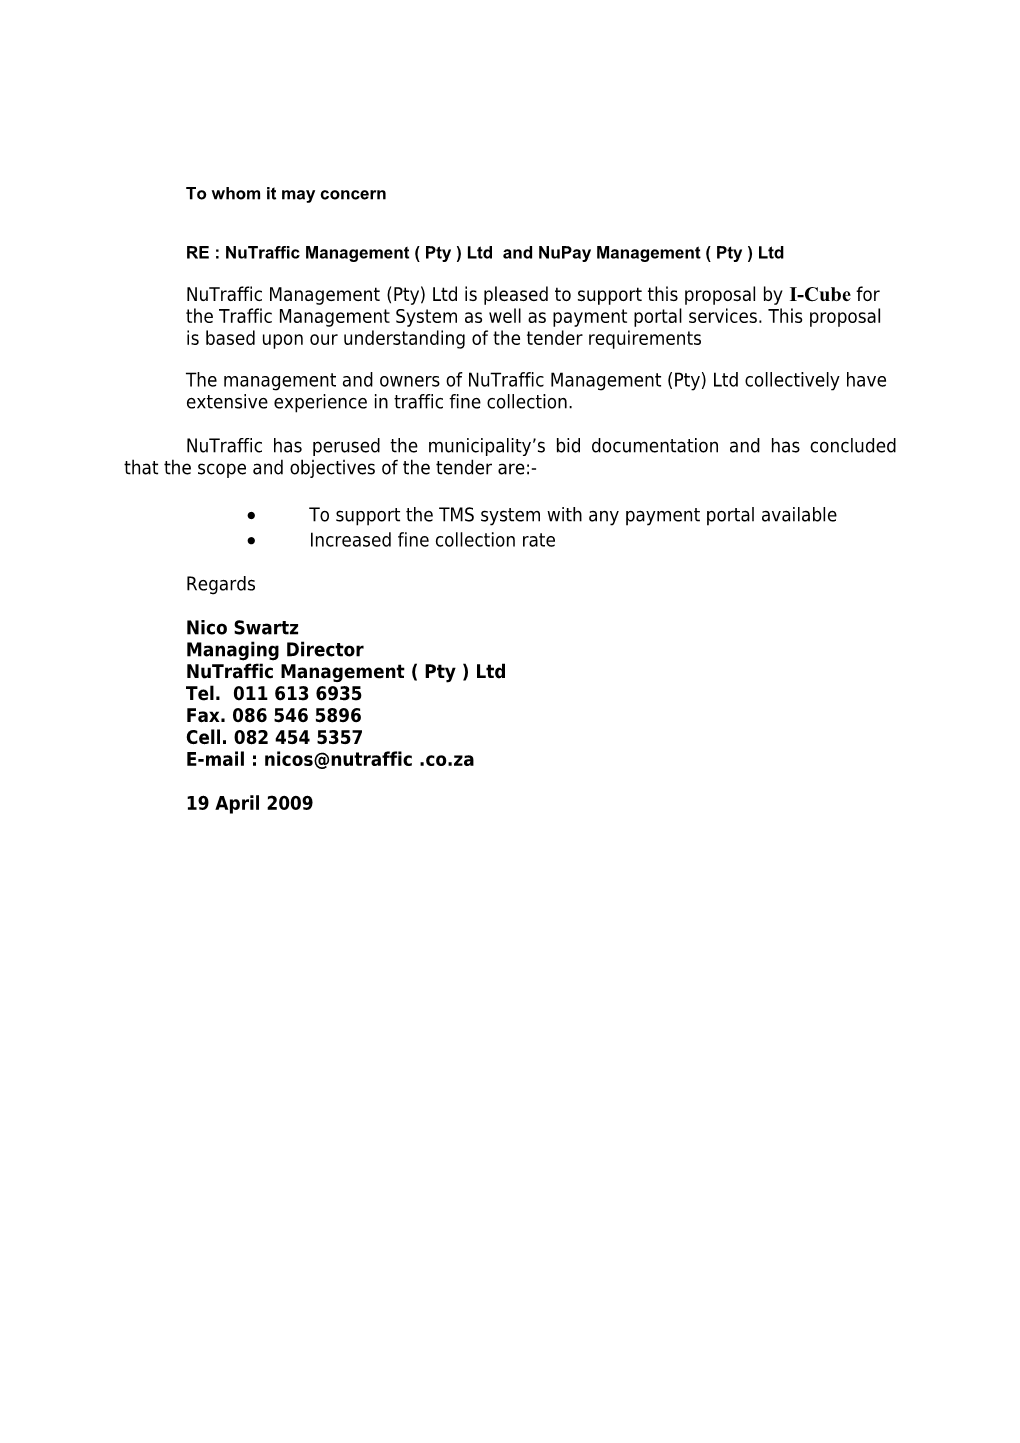 RE : Nutraffic Management ( Pty ) Ltd and Nupay Management ( Pty ) Ltd